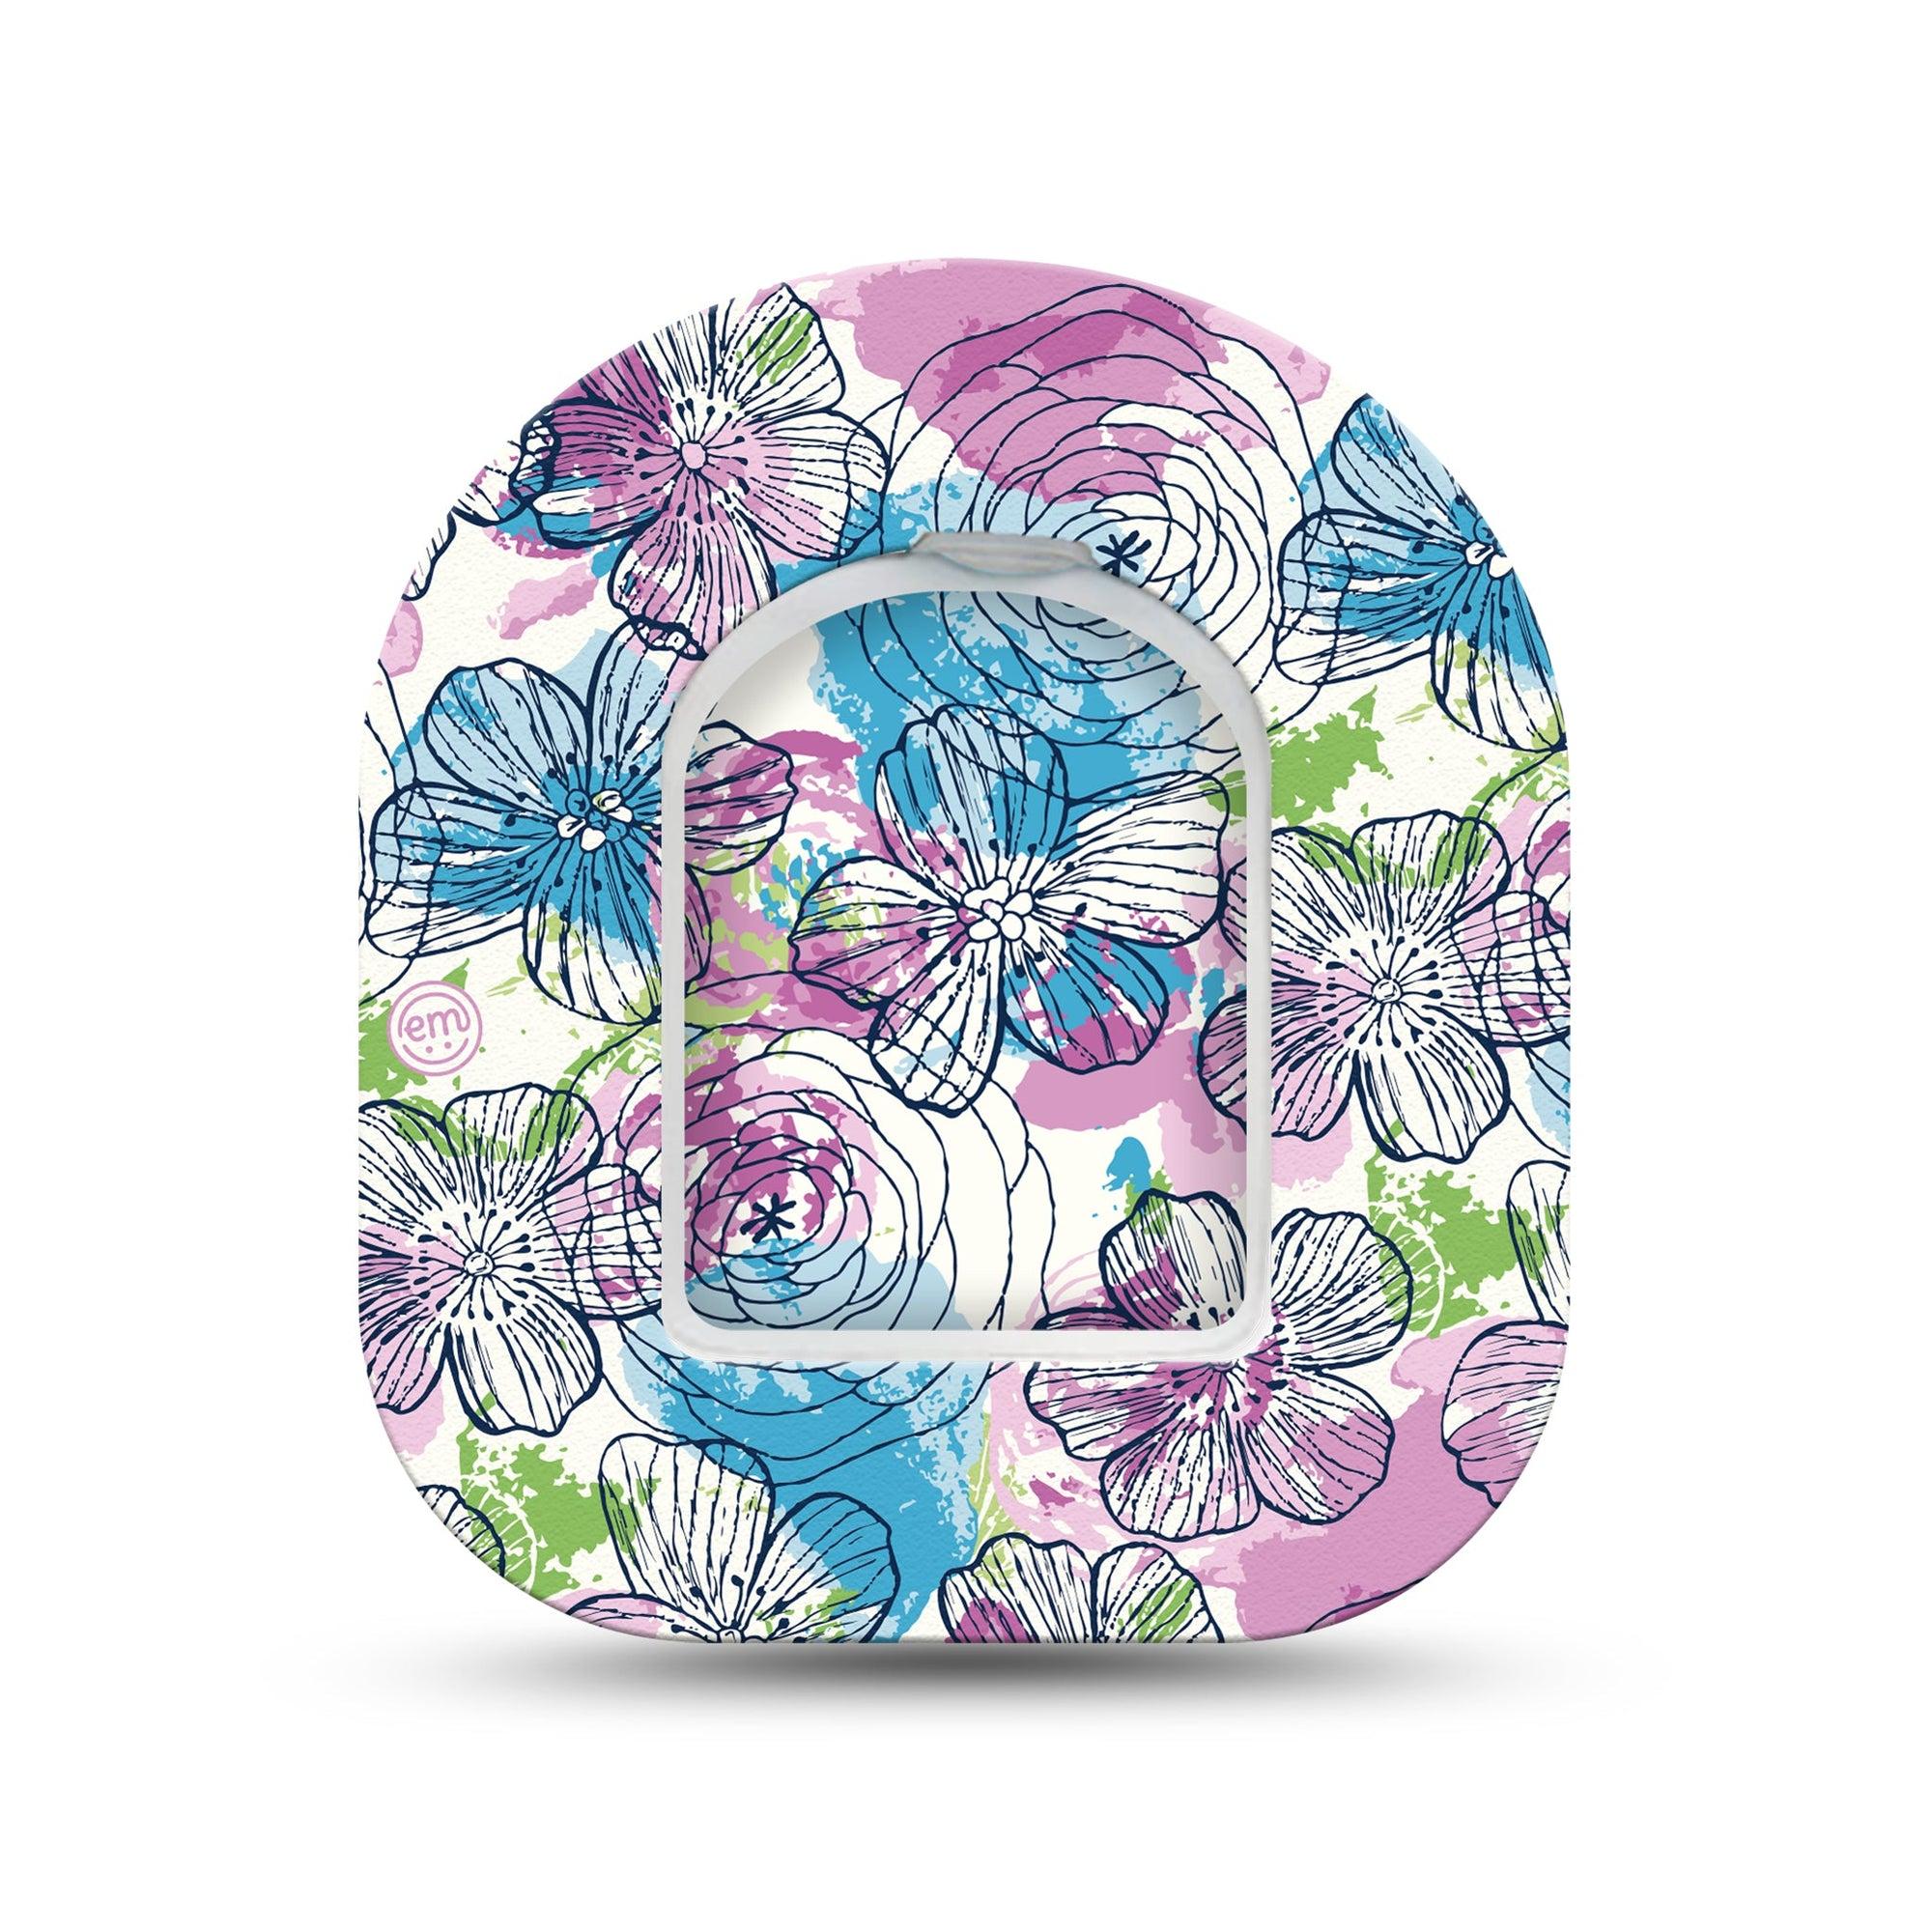 ExpressionMed Stenciled Flowers Omnipod Surface Center Sticker and Mini Tape Watercolor Art Themed Vinyl Sticker and Tape Design Pump Design